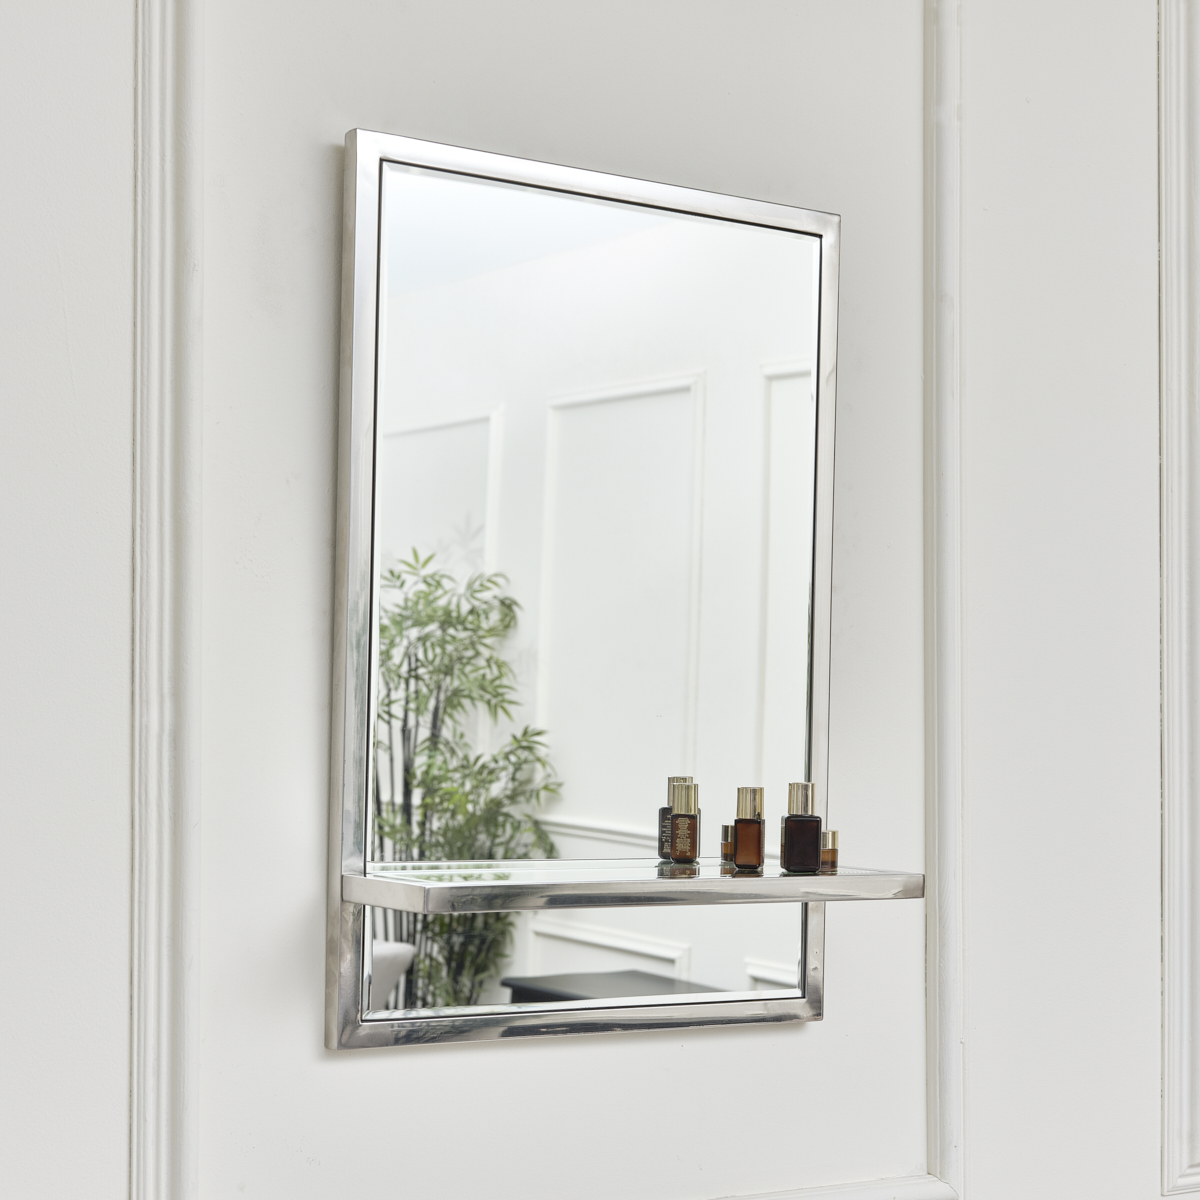 Mirrored Wall Mounted Mirror with Shelf 42cm x 62cm